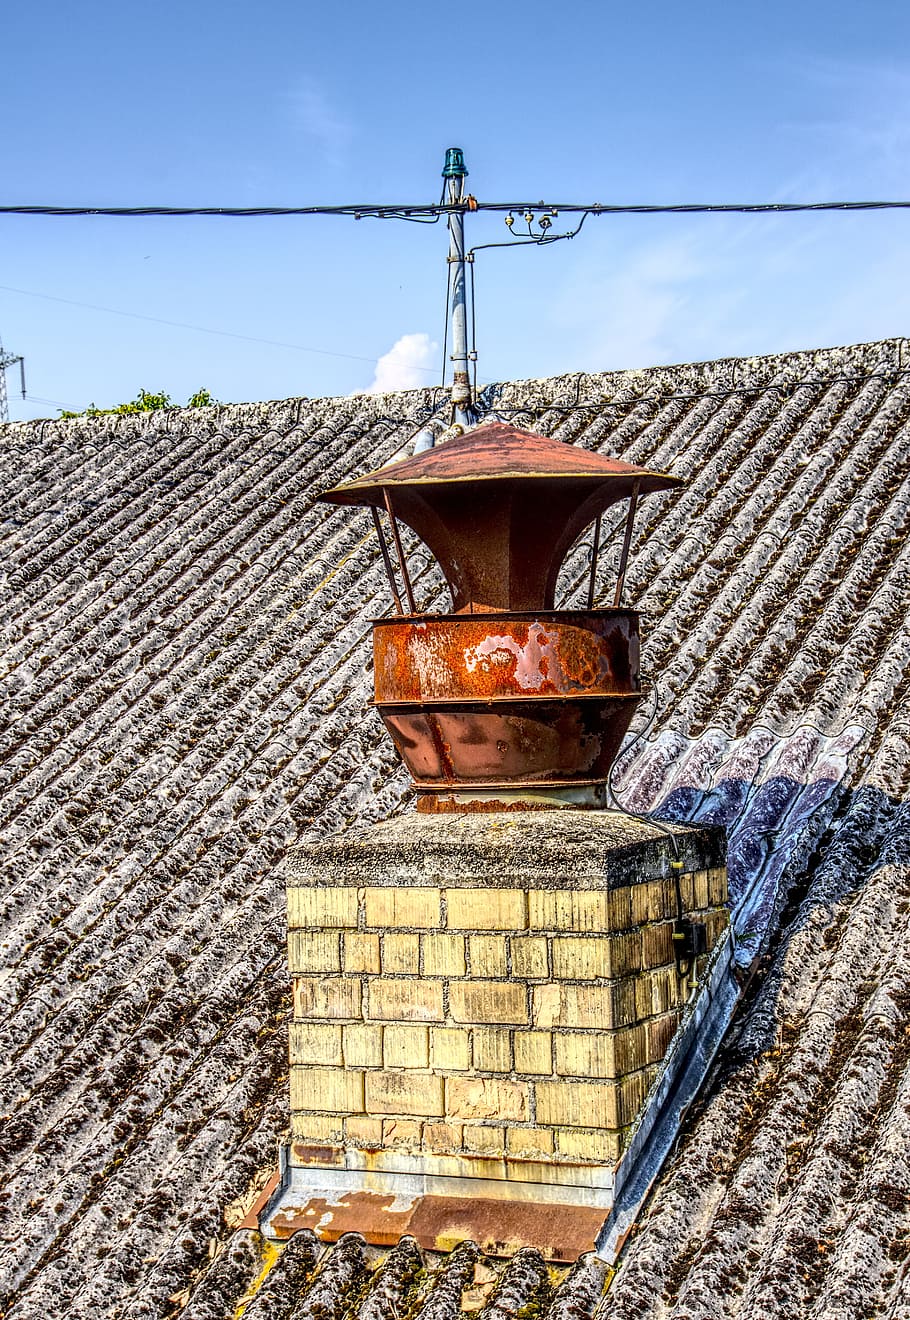 chimney, fireplace, iron, stainless, old, roof, brick, roofs, chimney cover, sky